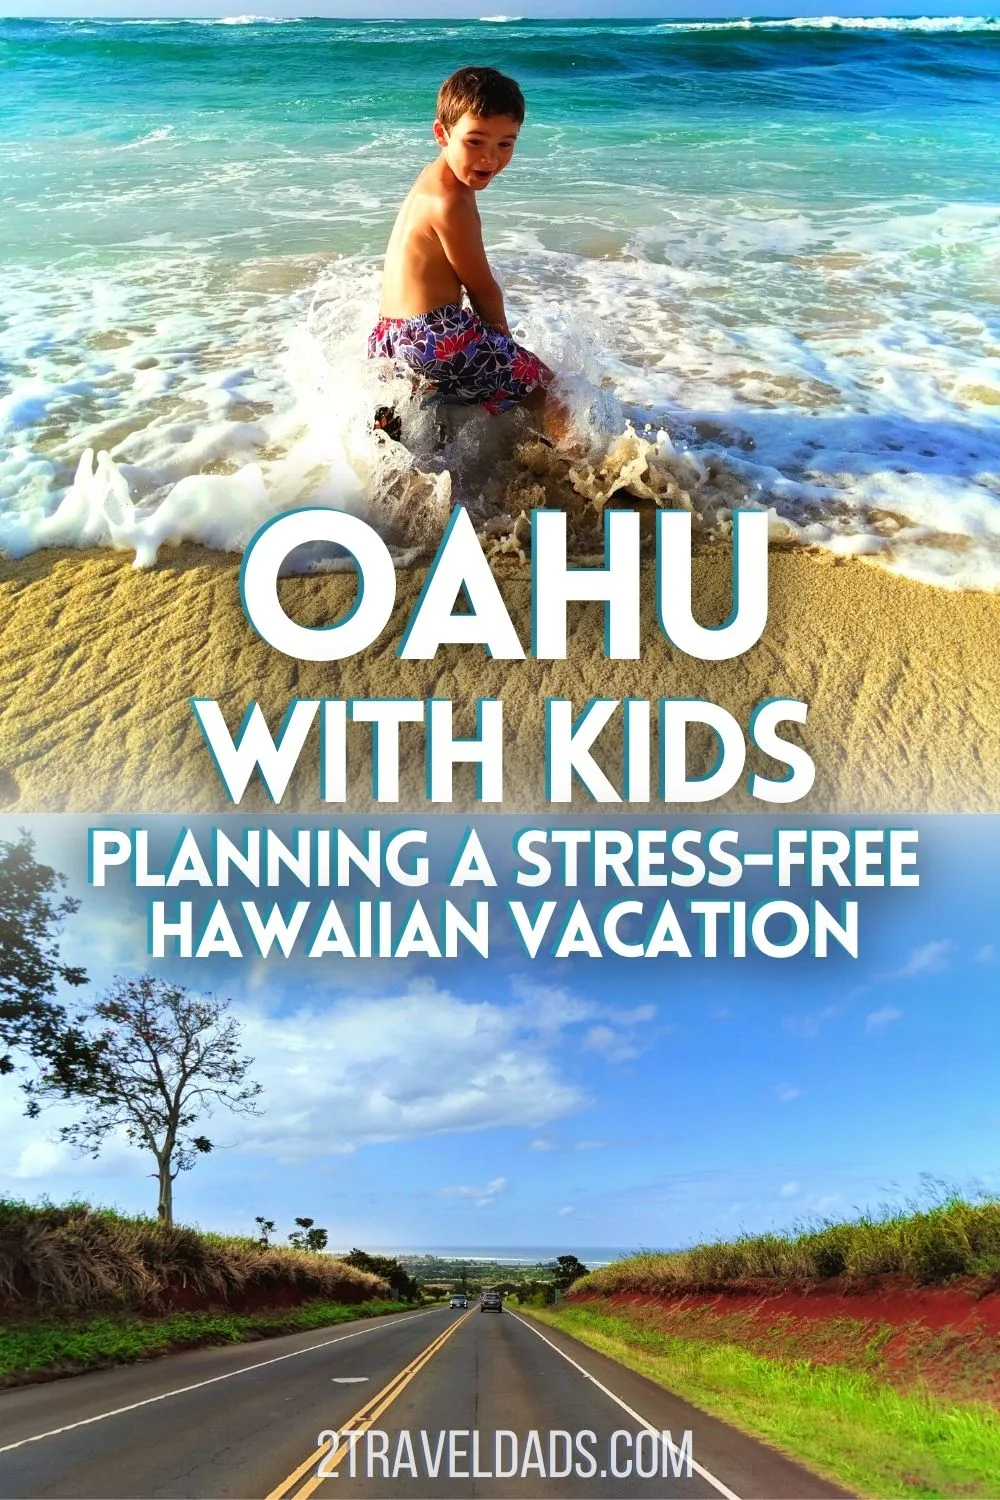 Oahu with kids is a great family vacation. While it's one of the most expensive destinations to travel to with kids, it's beautiful, has unique things to do and you'll enjoy every minute. Tips for planning a stress-free trip to Oahu with kids and budget friendly ideas.